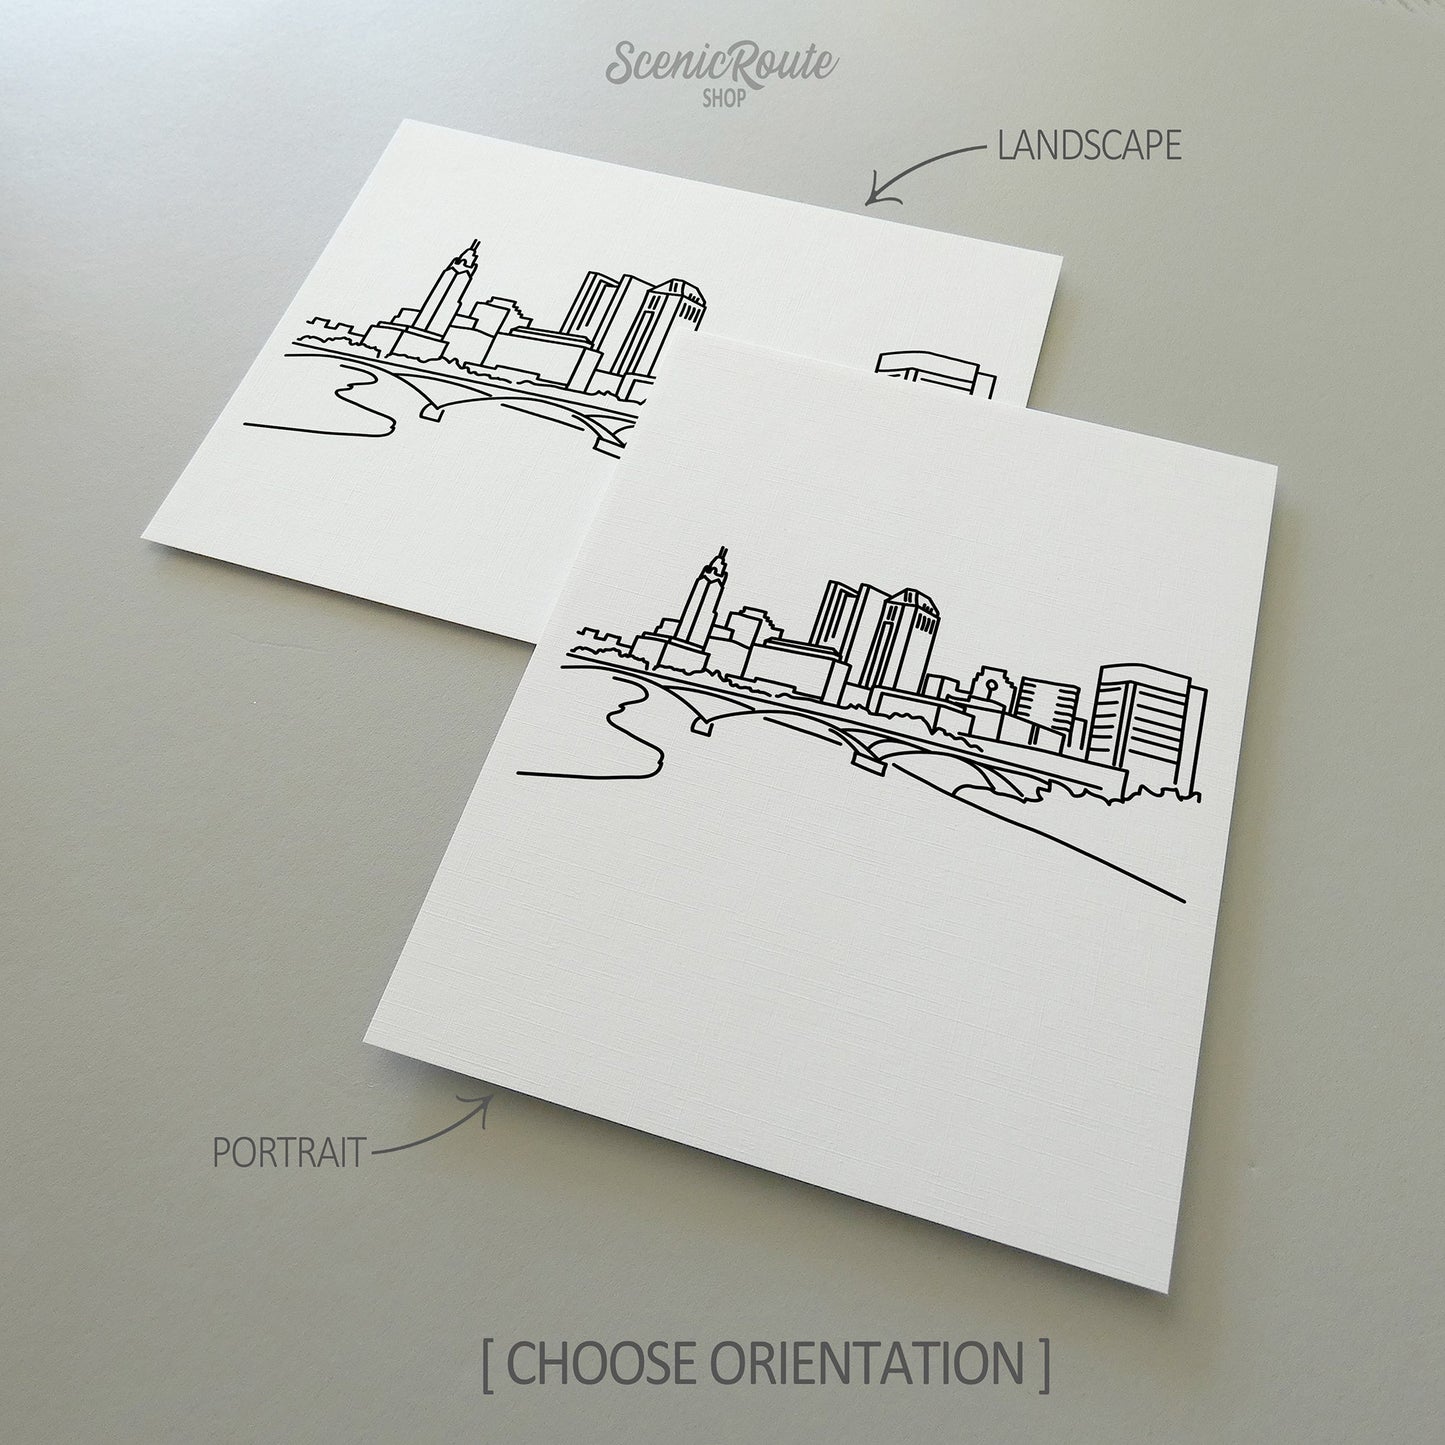 Two line art drawings of the Columbus Skyline on white linen paper with a gray background.  The pieces are shown in portrait and landscape orientation for the available art print options.